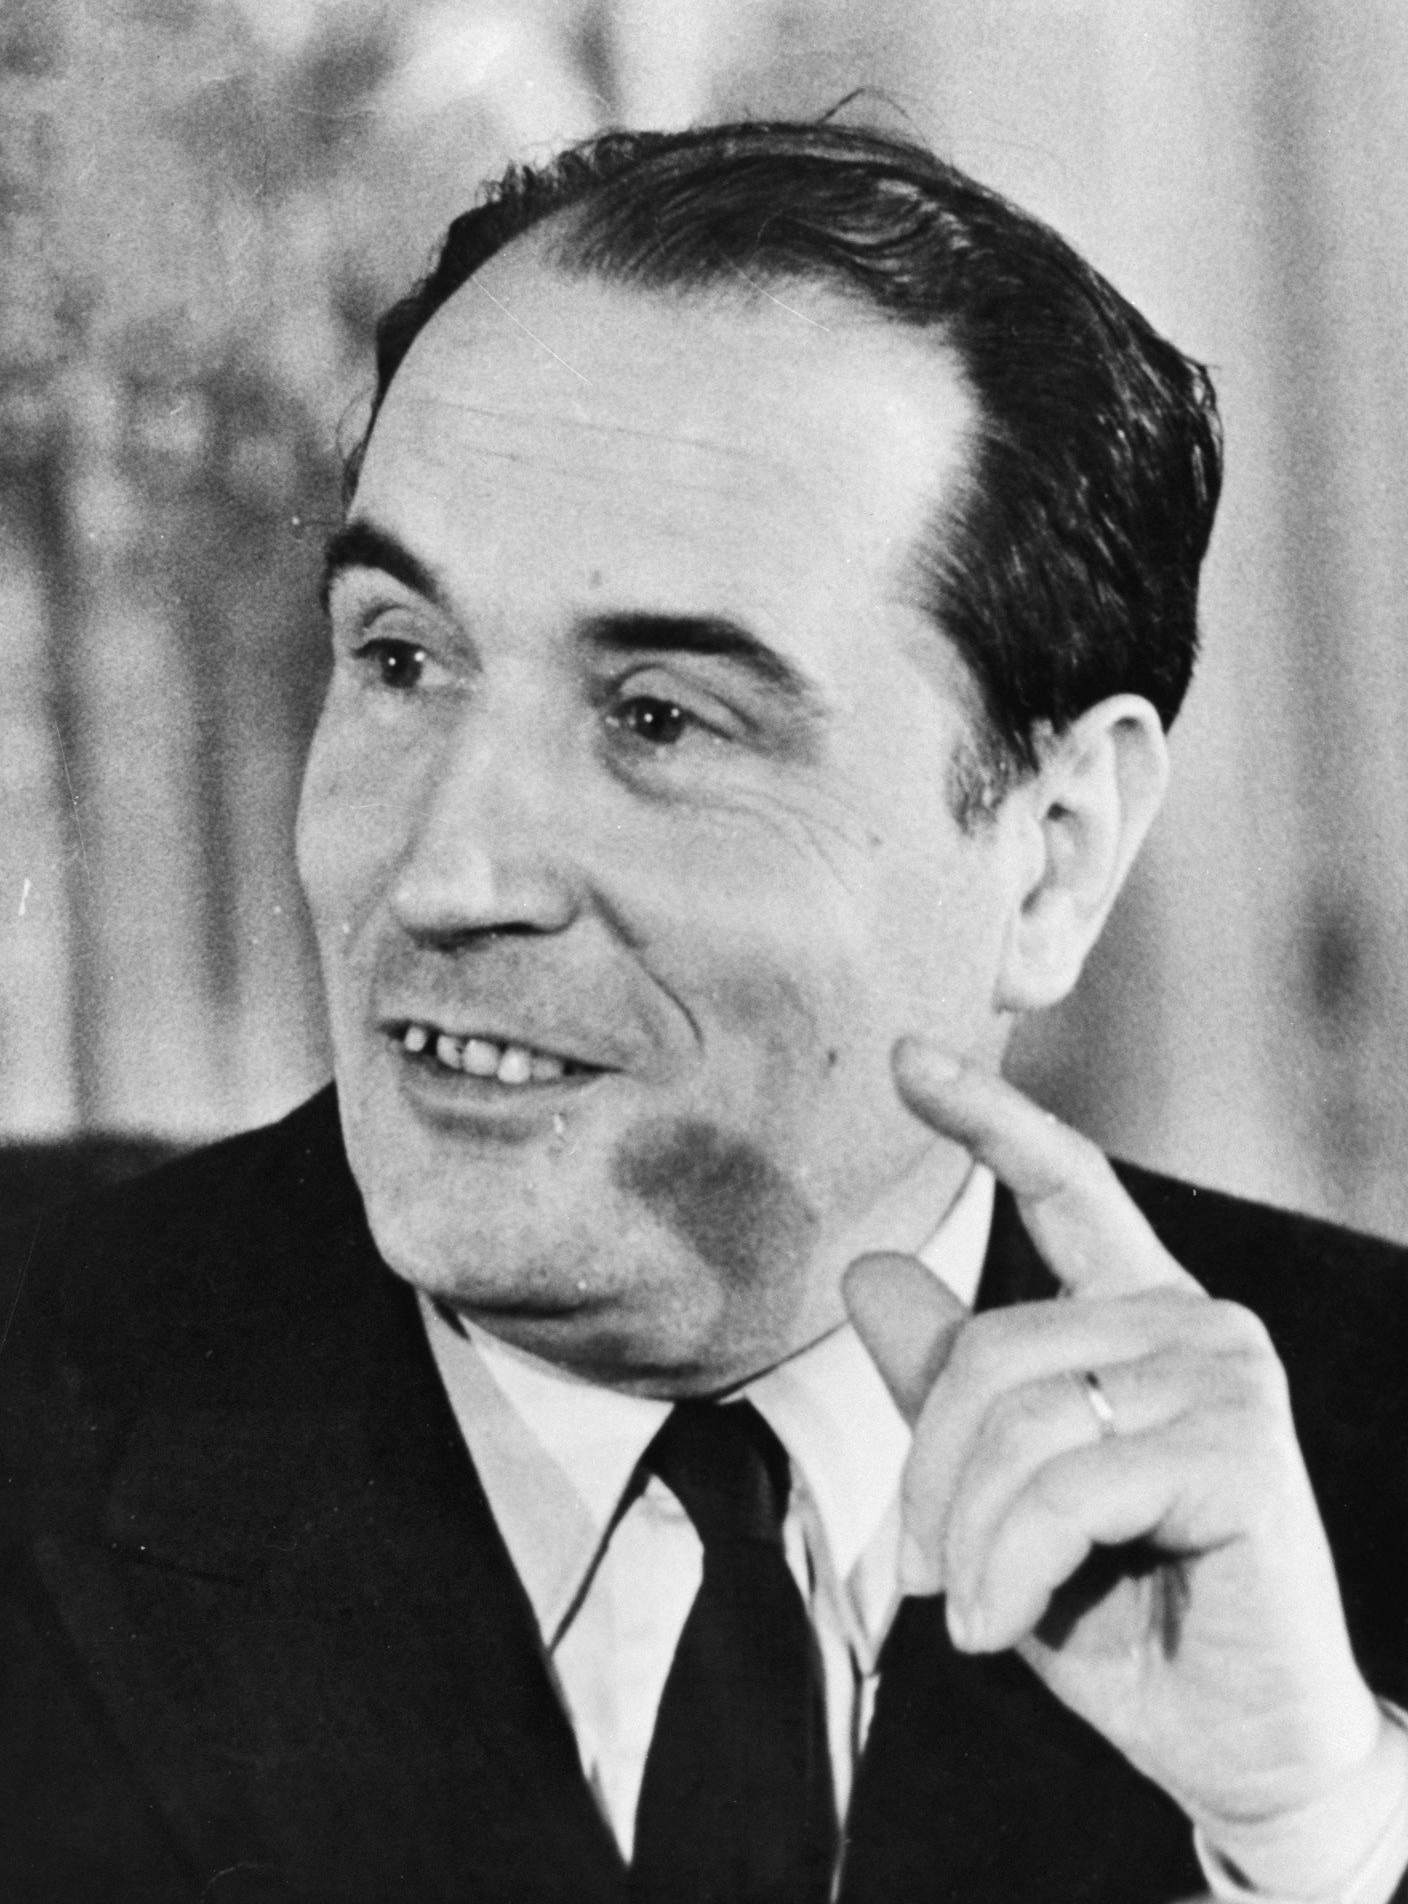 fran-ois-mitterrand-celebrity-biography-zodiac-sign-and-famous-quotes